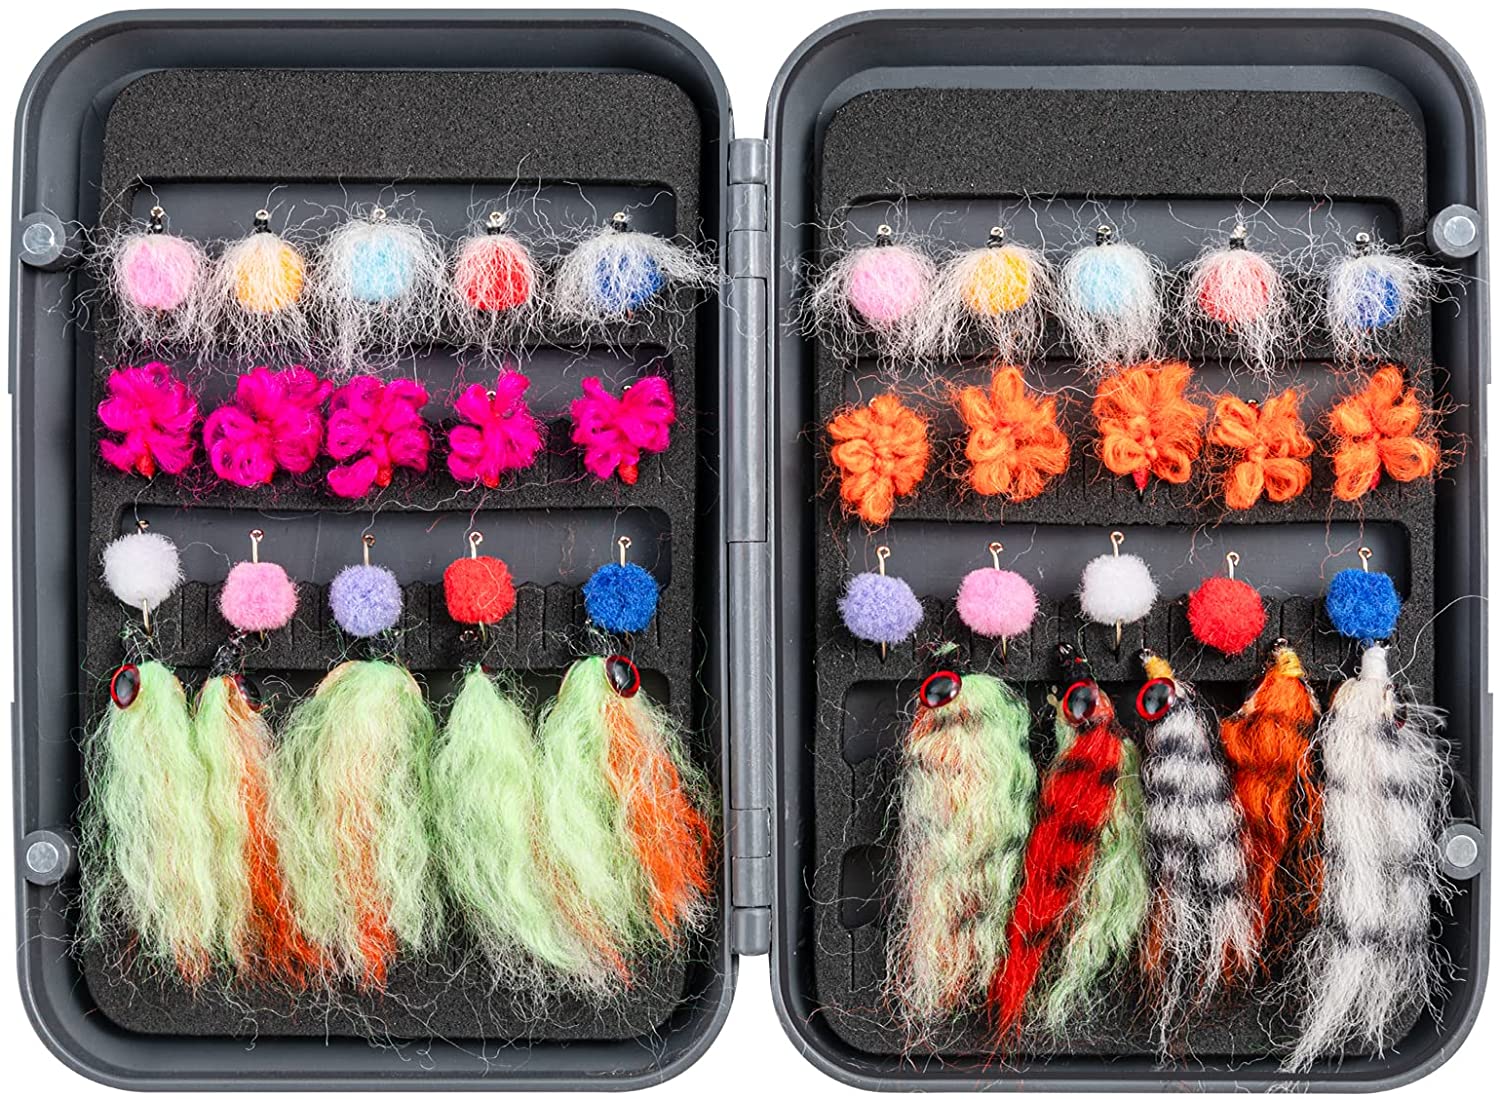 Fly Fishing Lures | 15 Trout Flies for Fly Fishing | Dry Flies Size 14  Fishing Flies | Fly Fishing Flies Kit Effective Trout Fly Patterns